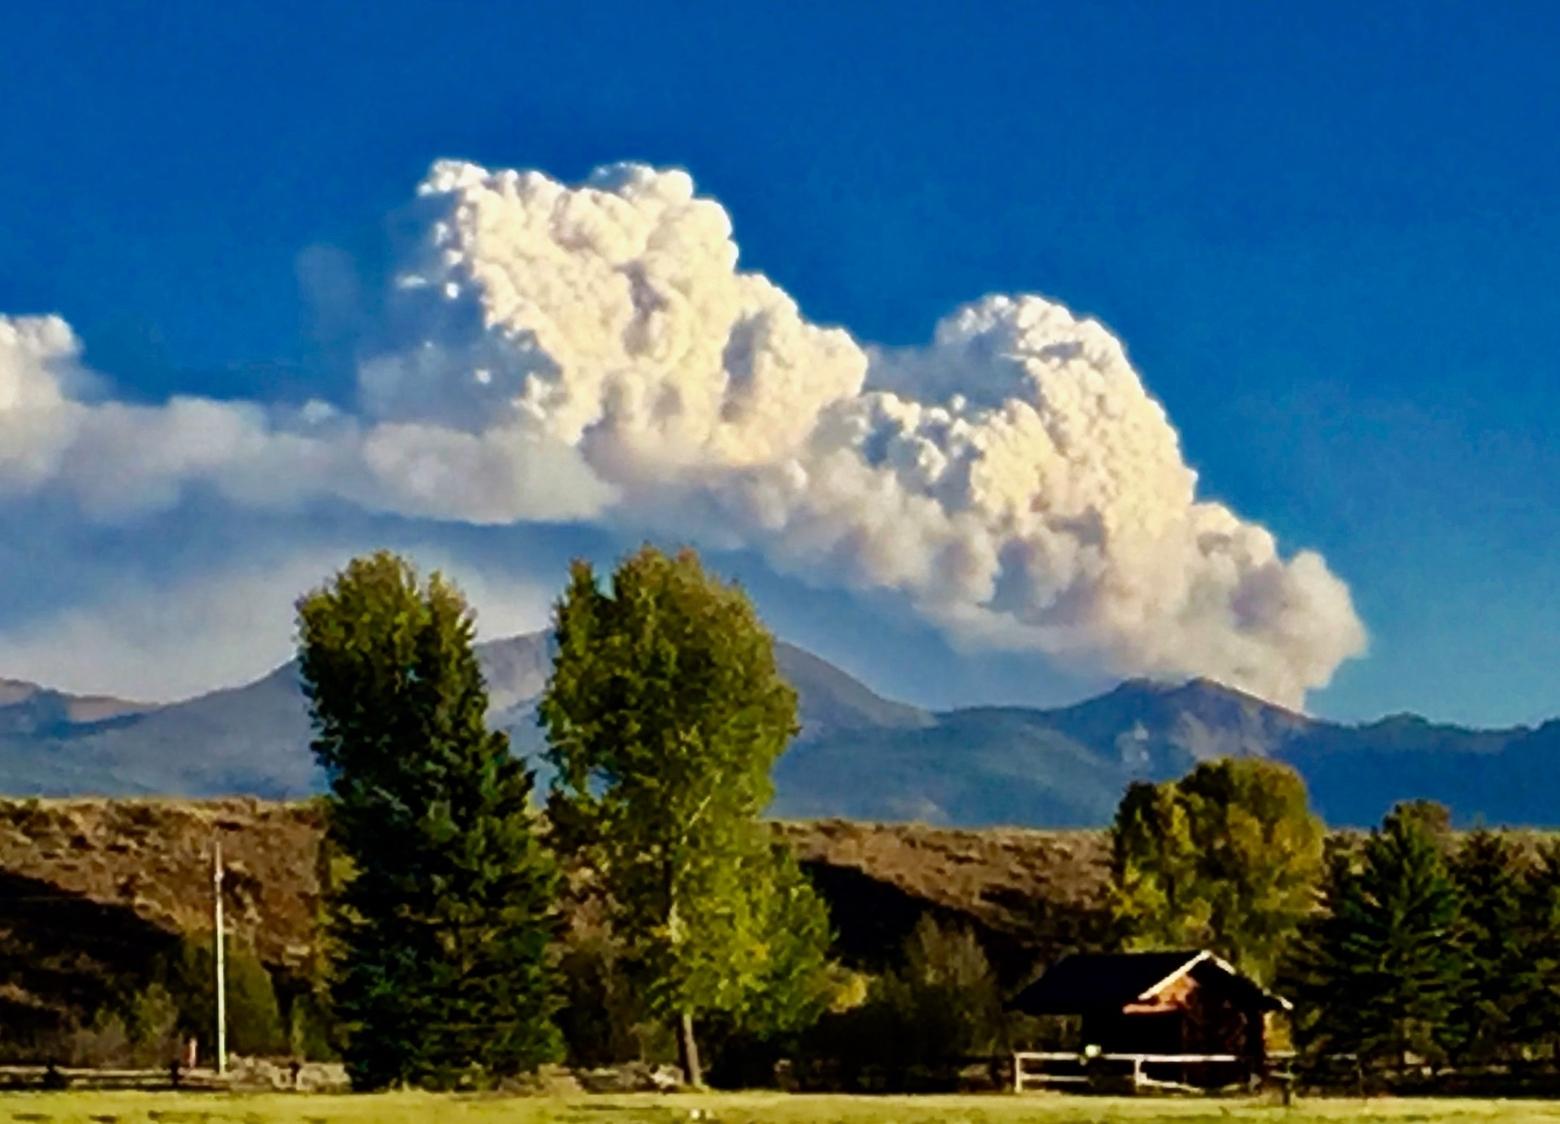 The first day in mid September that the Roosevelt Fire blew up south of Jackson.  The blaze, believe to have been caused by an unattended campfire, has burned 55 homes and cost millions to fight.  Photo by Todd Wilkinson